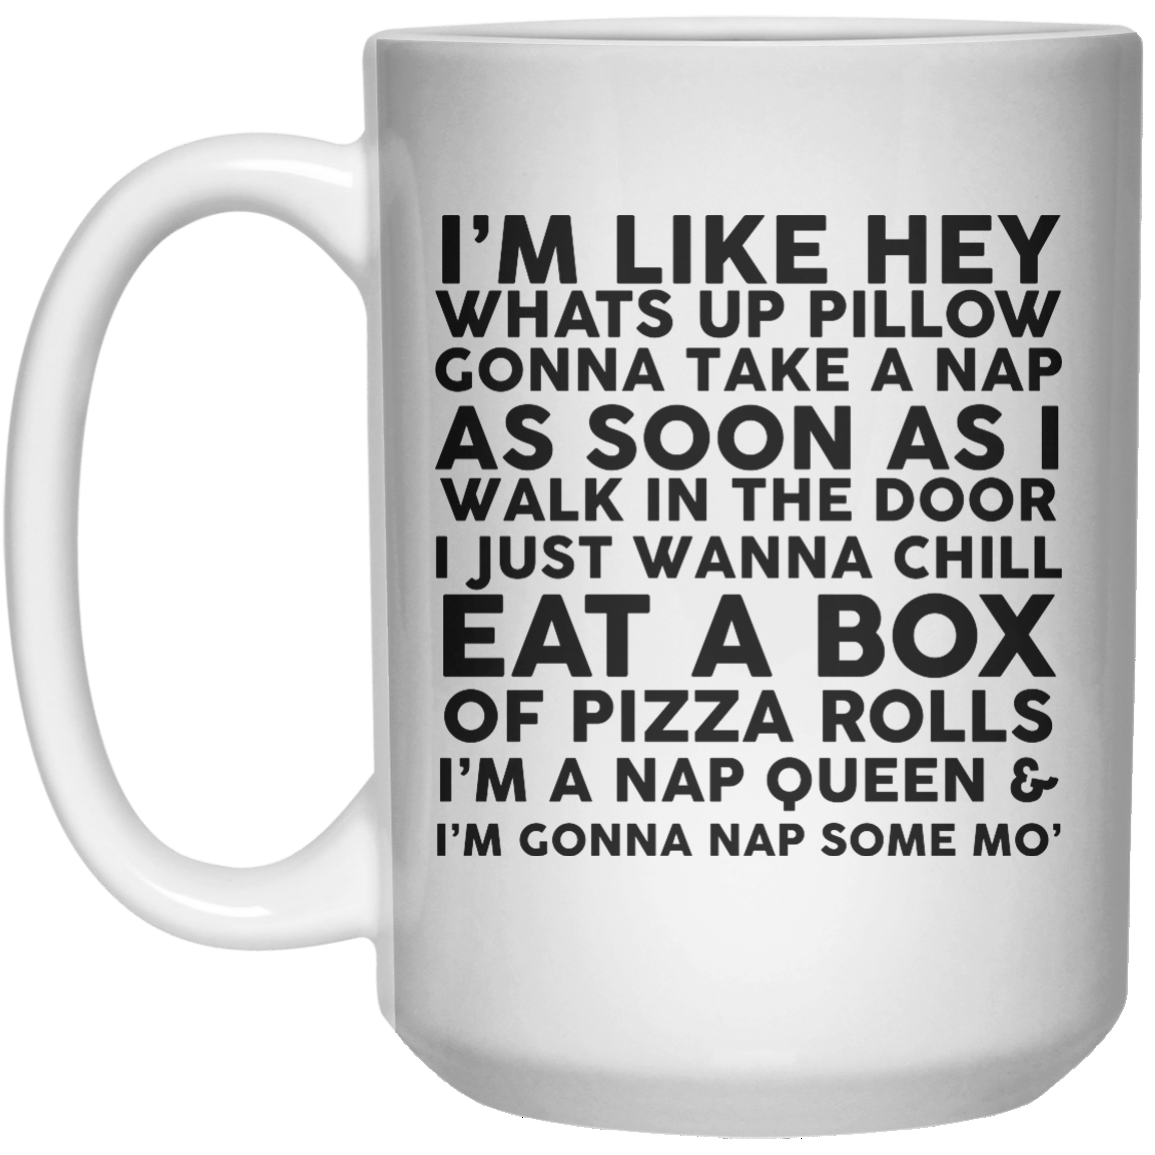 I’m Like Hey Whats Up Pillow Gonna Take A Nap As Soon As I Walk In The Door I Just Wanna Chill Eat A Box Of Pizza Rolls I’m A Nap Queen & I’m Gonna Nap Some Mo’ MUG  Mug - 15oz - Shirtoopia